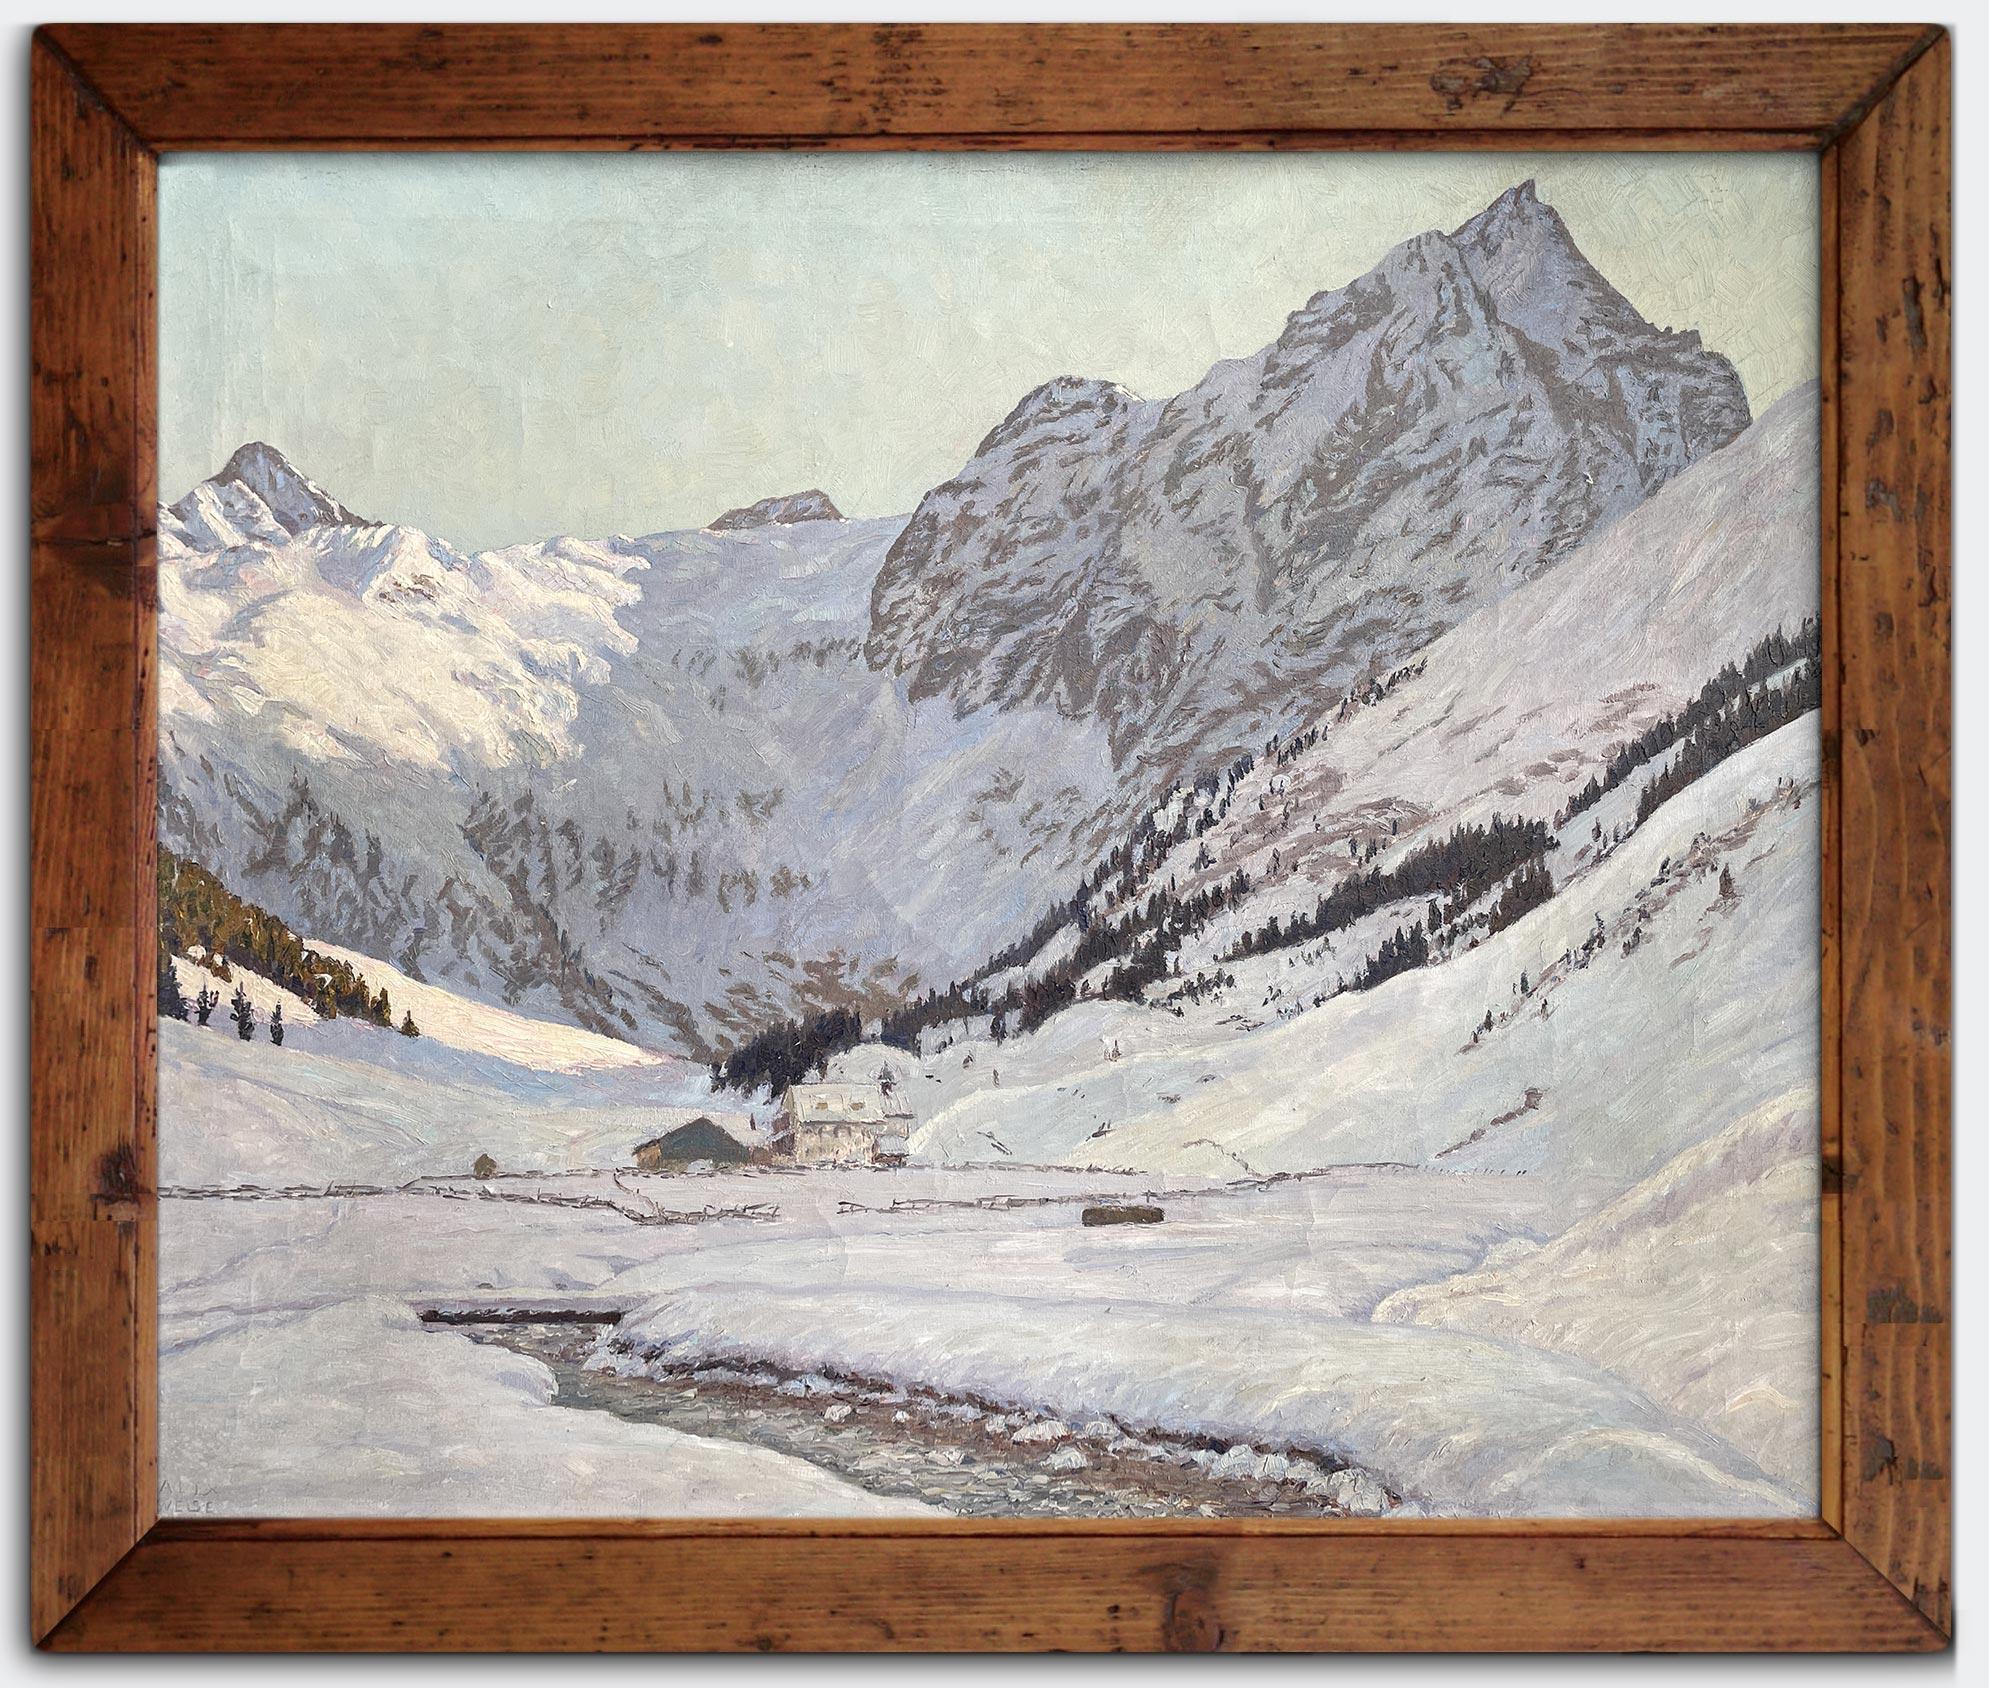 Snowy Landscape Oil On Canvas by Alex Weise - Dolomites 1930 For Sale 2